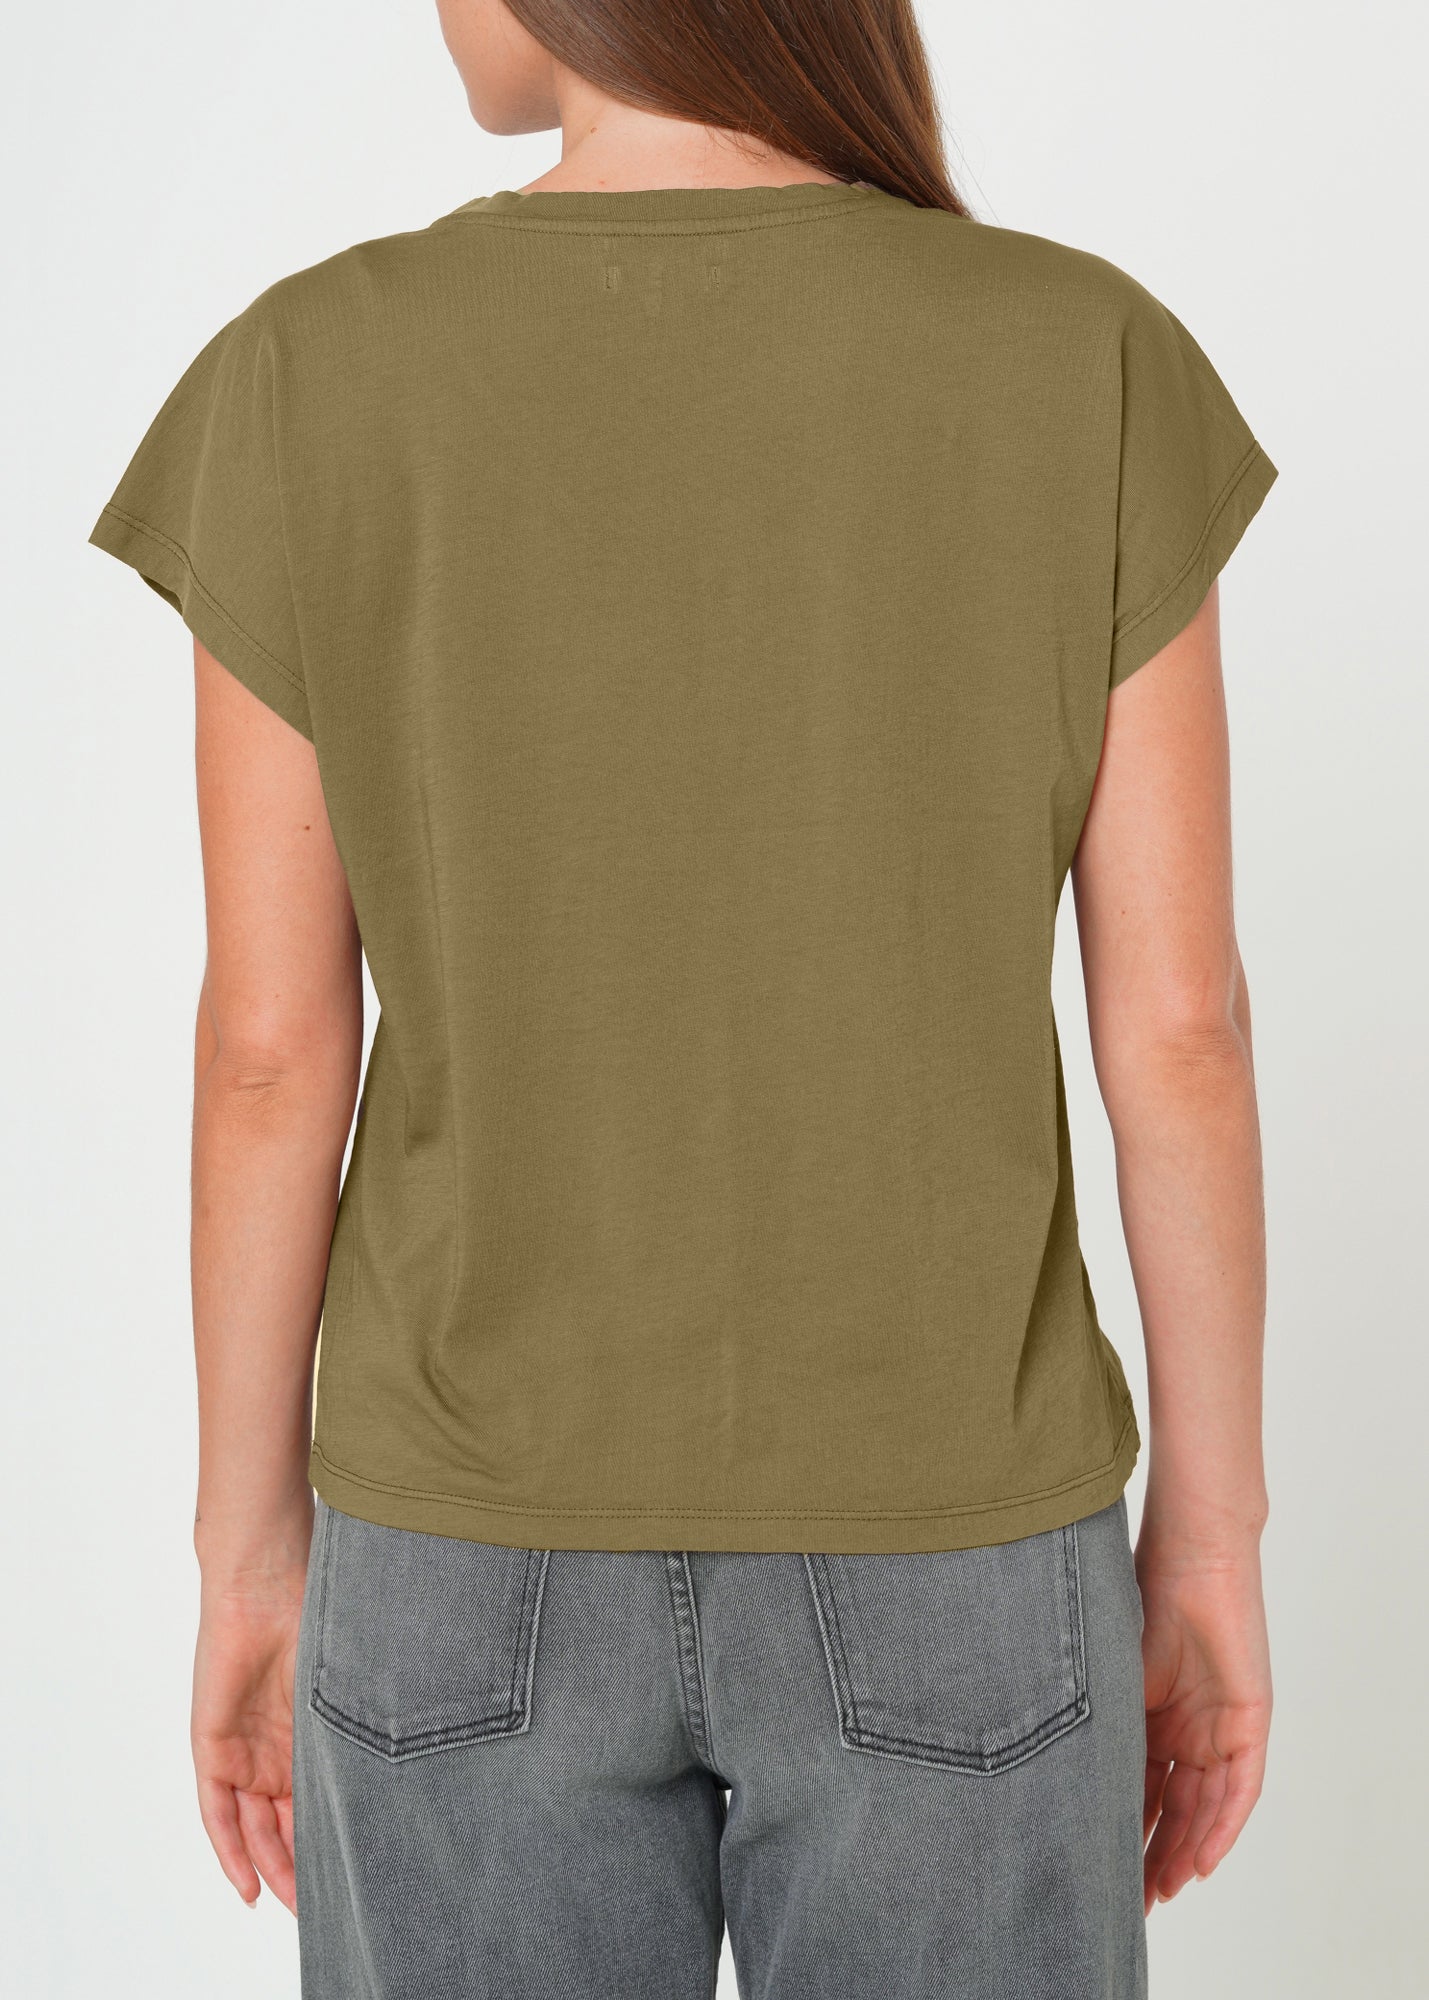 Supima Cotton Cap Sleeve V Neck Tee In Military Green